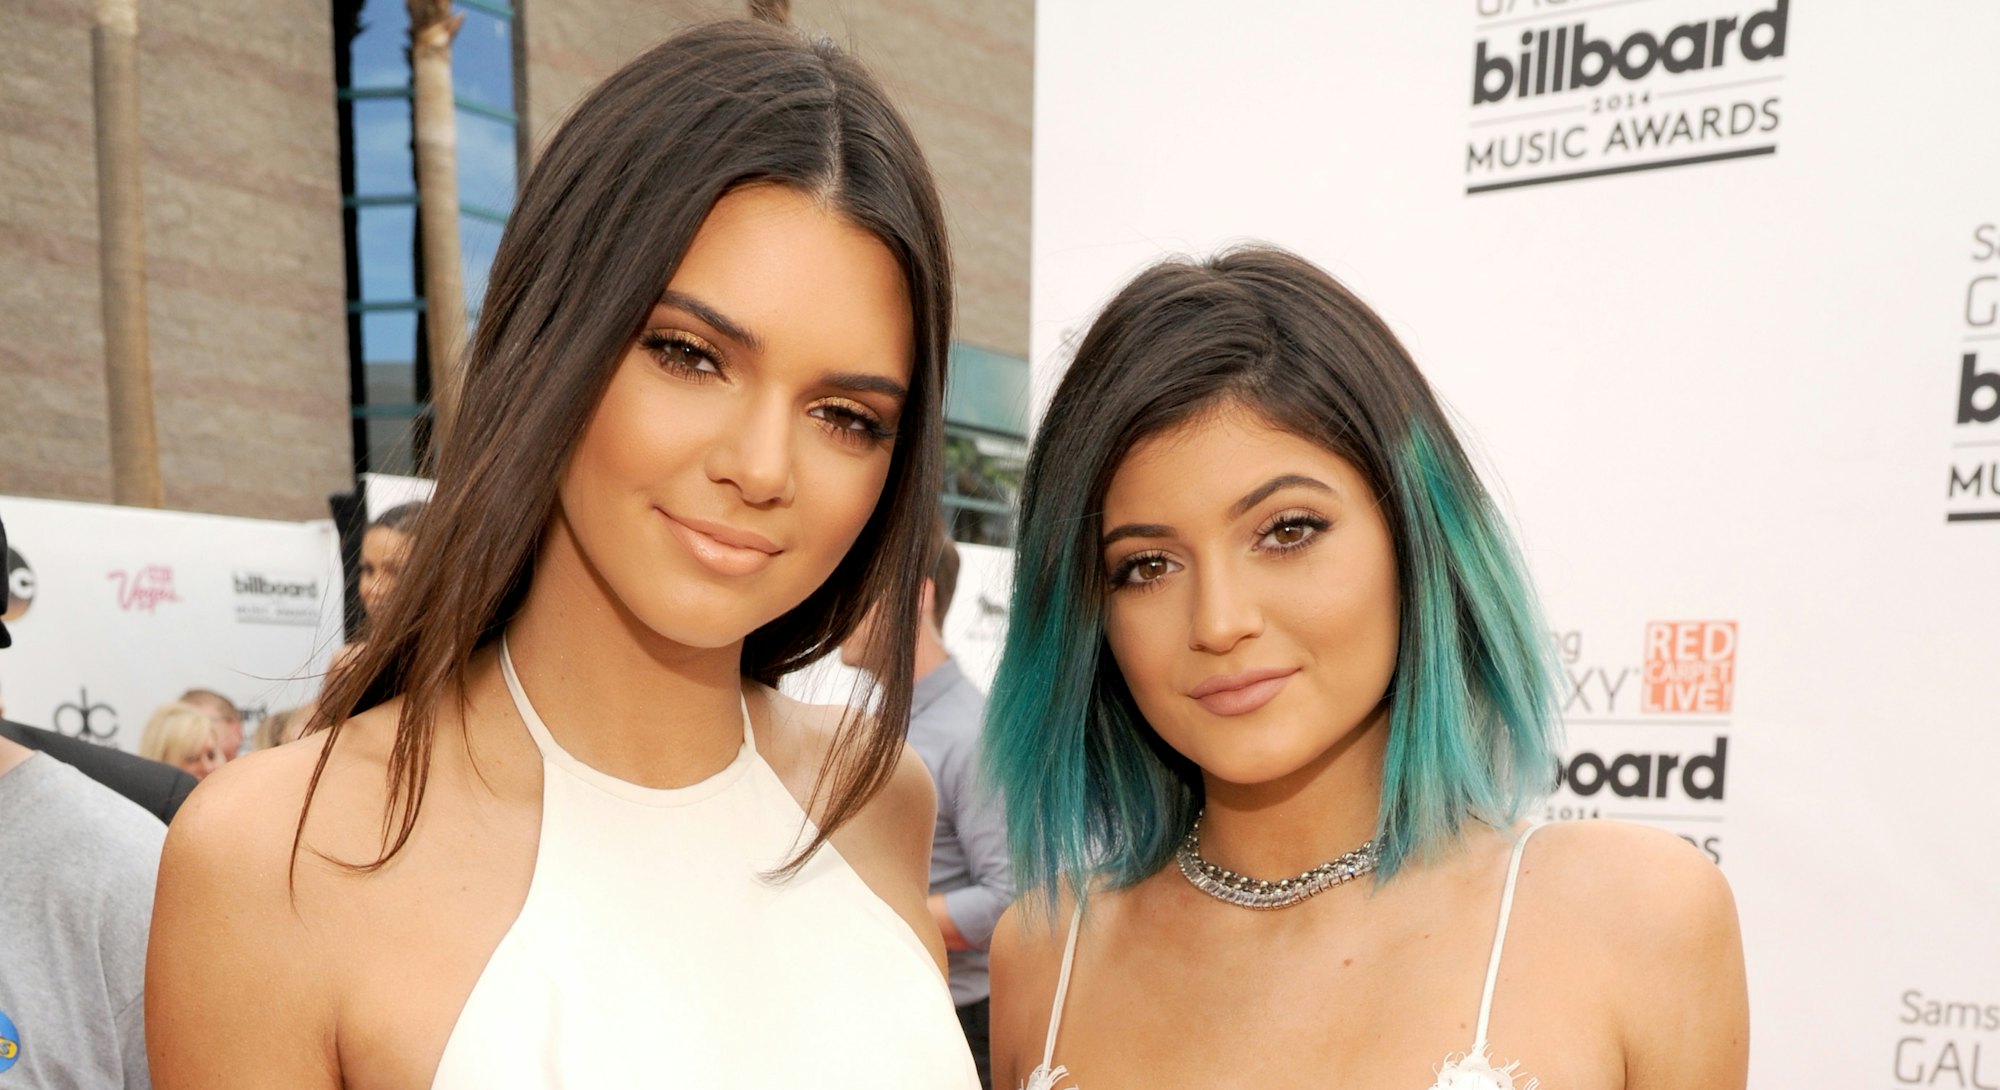 Kendall and Kylie Jenner pose on the red carpet 